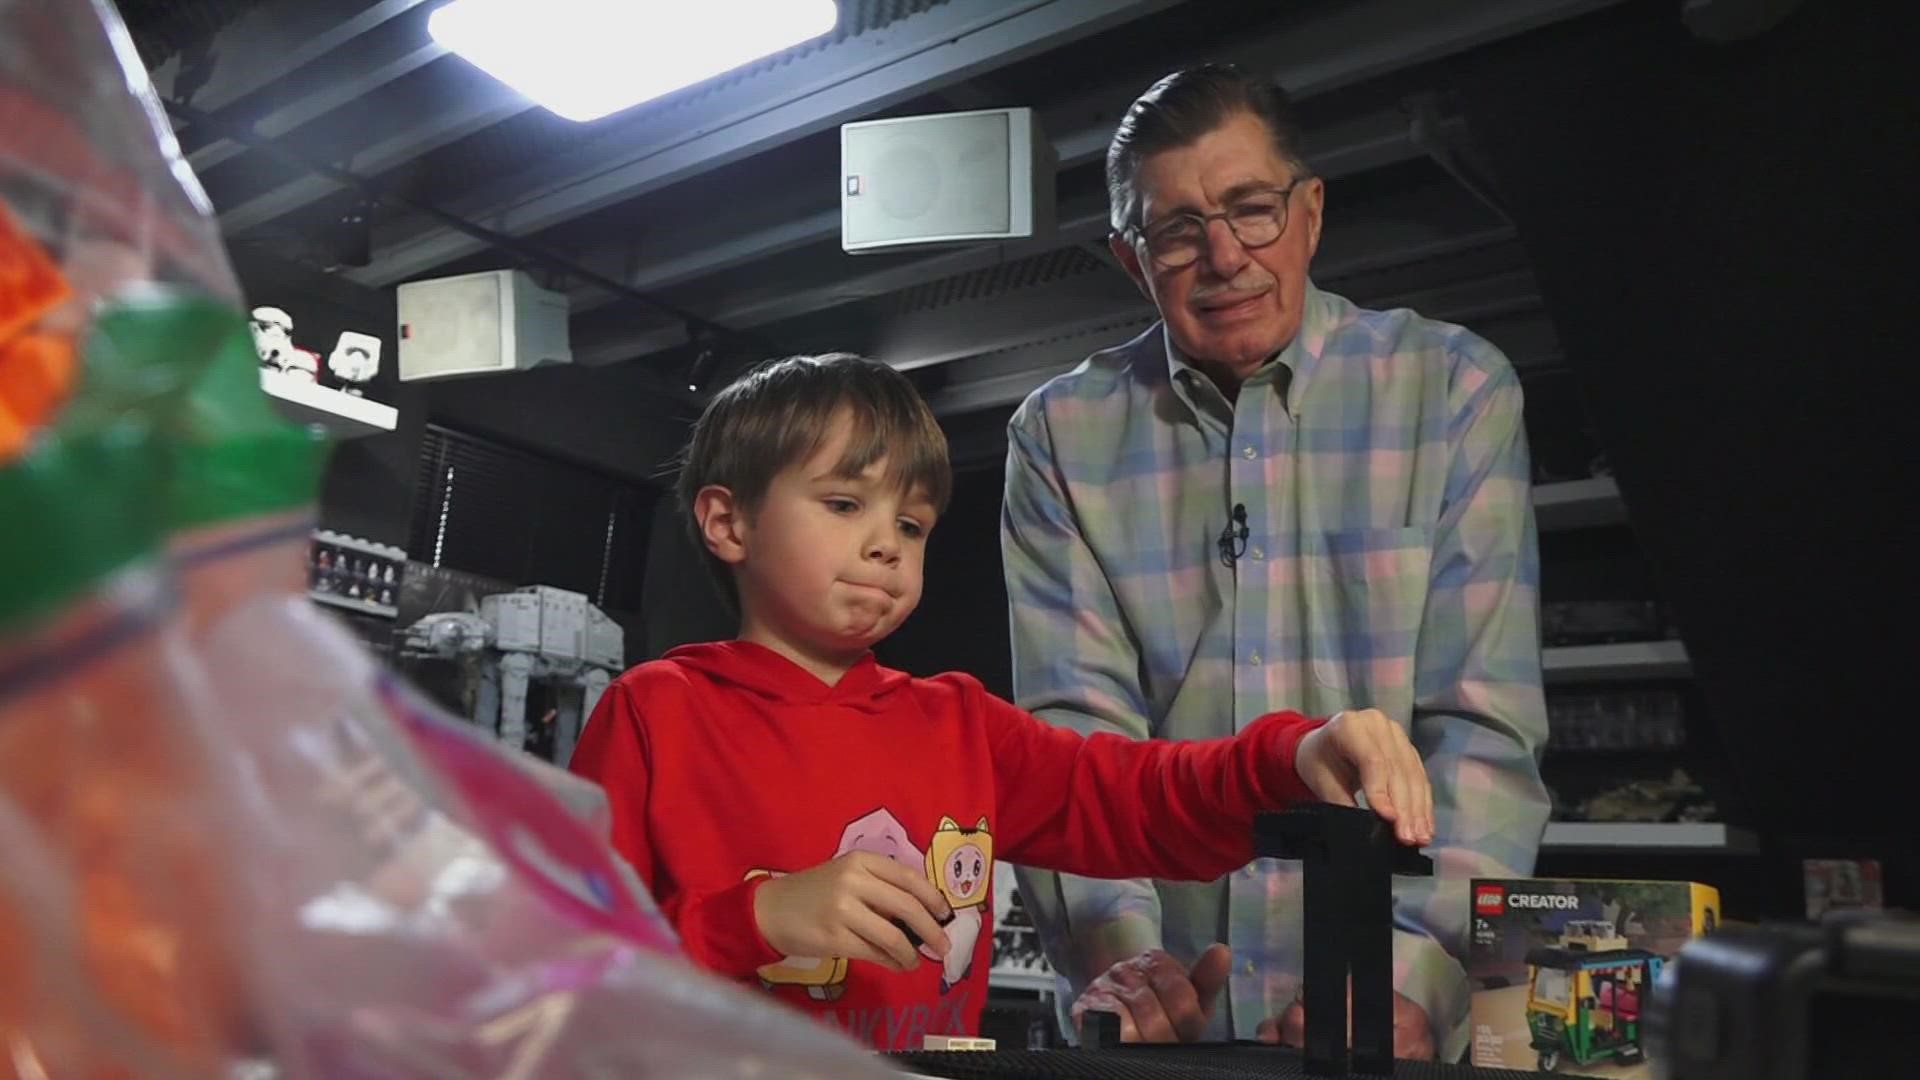 We all grew up playing with legos, but a Knoxville great-grandfather never stopped and now, his creations are being recognized on a national level.